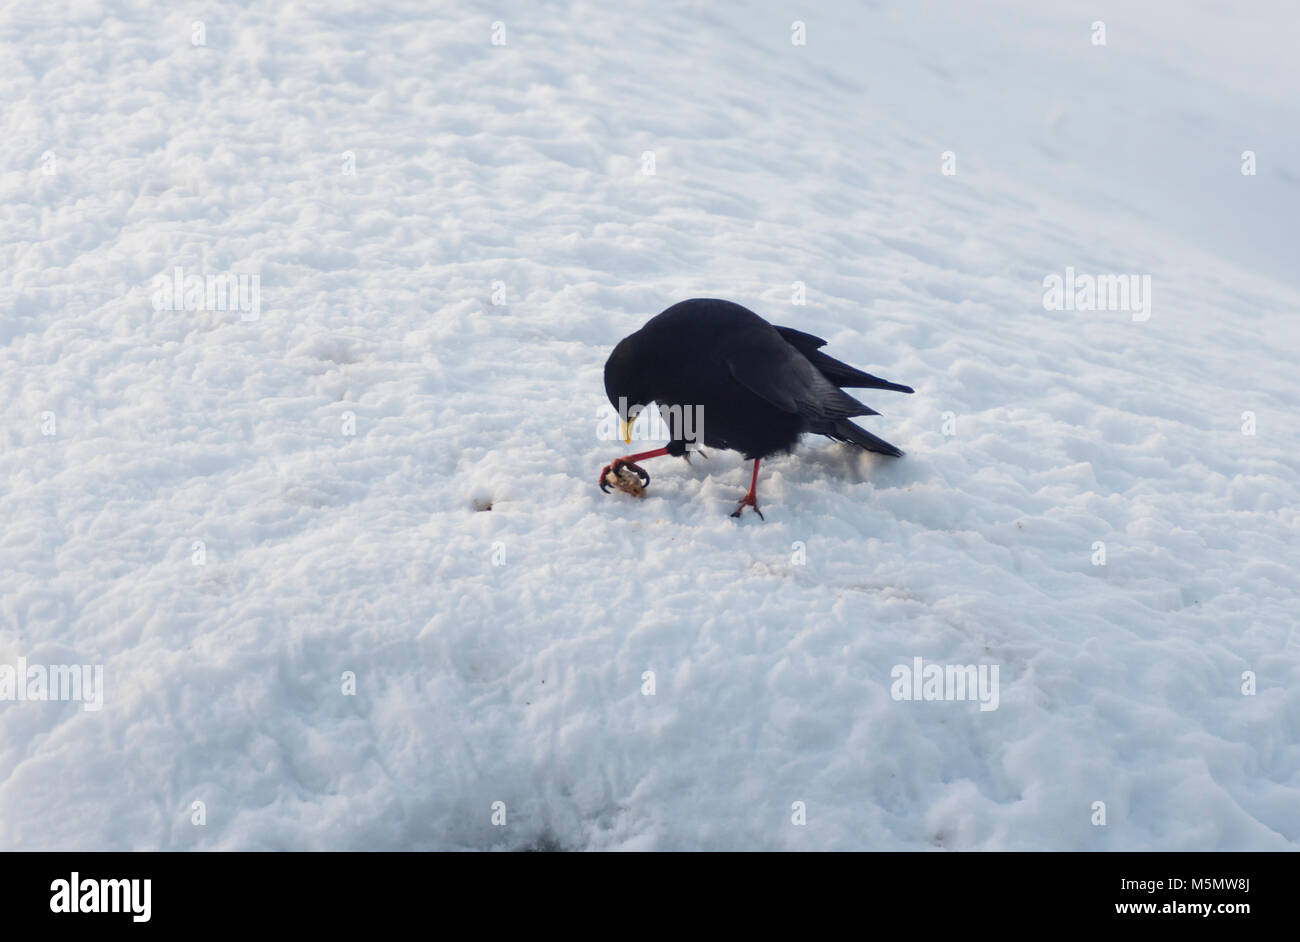 An alpine chough (Pyrrhocorax graculus) is sitting in the snow during winter in Switzerland. Stock Photo